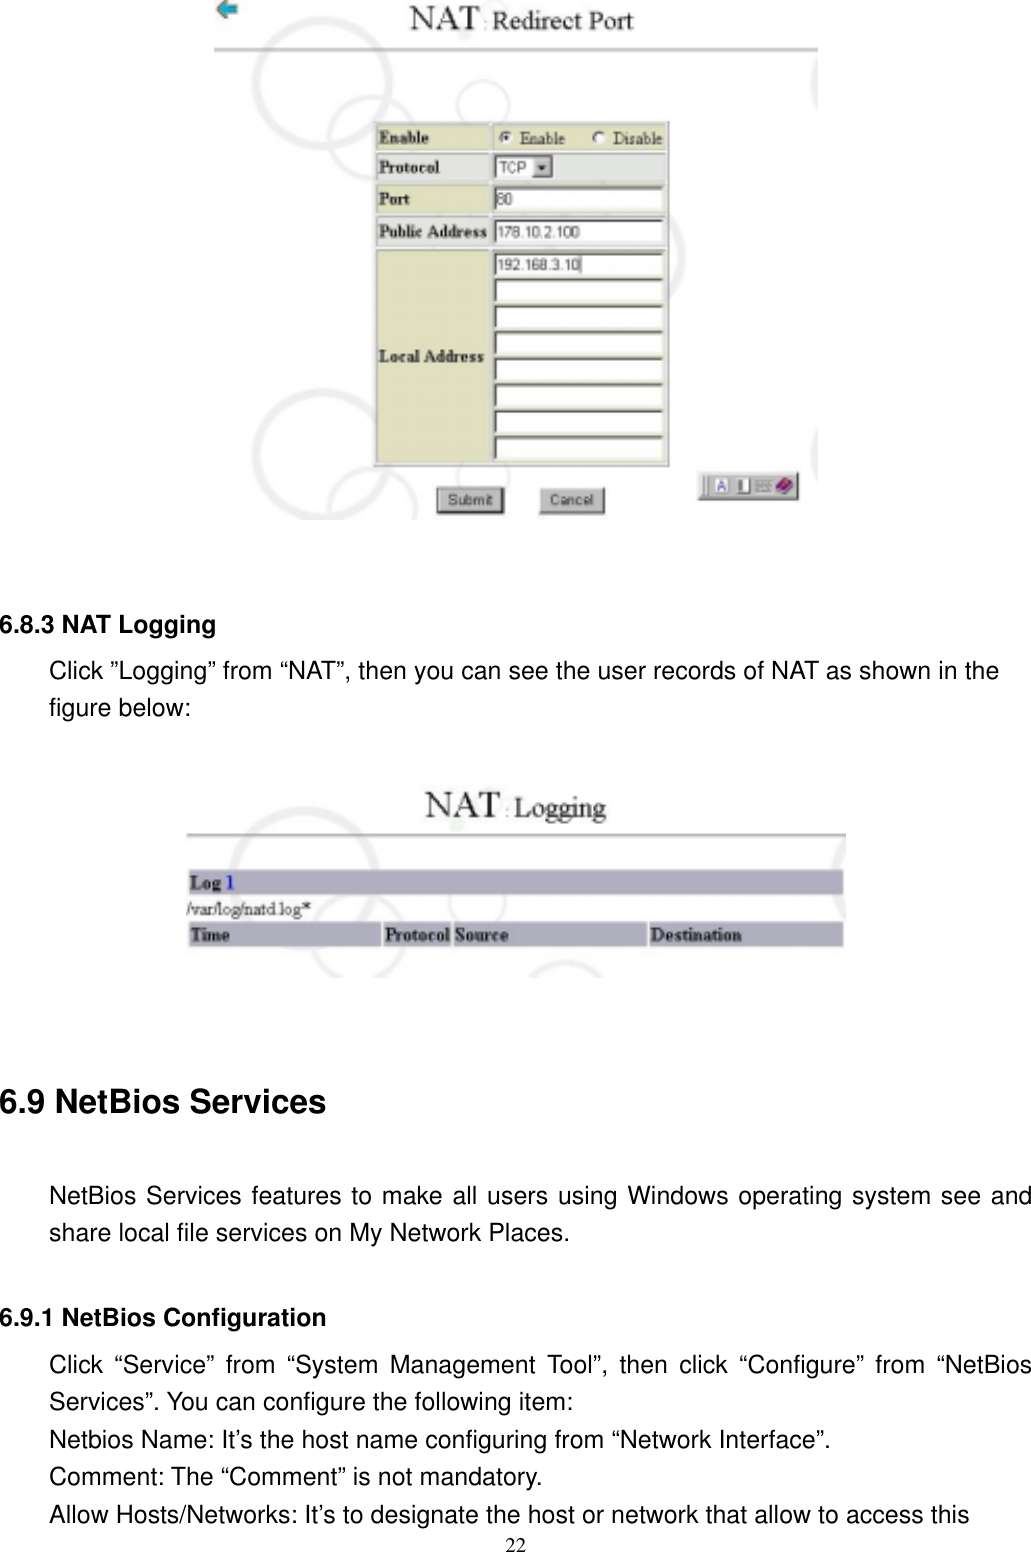  22   6.8.3 NAT Logging Click ”Logging” from “NAT”, then you can see the user records of NAT as shown in the figure below:     6.9 NetBios Services  NetBios Services features to make all users using Windows operating system see and share local file services on My Network Places.    6.9.1 NetBios Configuration   Click “Service” from “System Management Tool”, then click “Configure” from “NetBios Services”. You can configure the following item: Netbios Name: It’s the host name configuring from “Network Interface”. Comment: The “Comment” is not mandatory. Allow Hosts/Networks: It’s to designate the host or network that allow to access this 